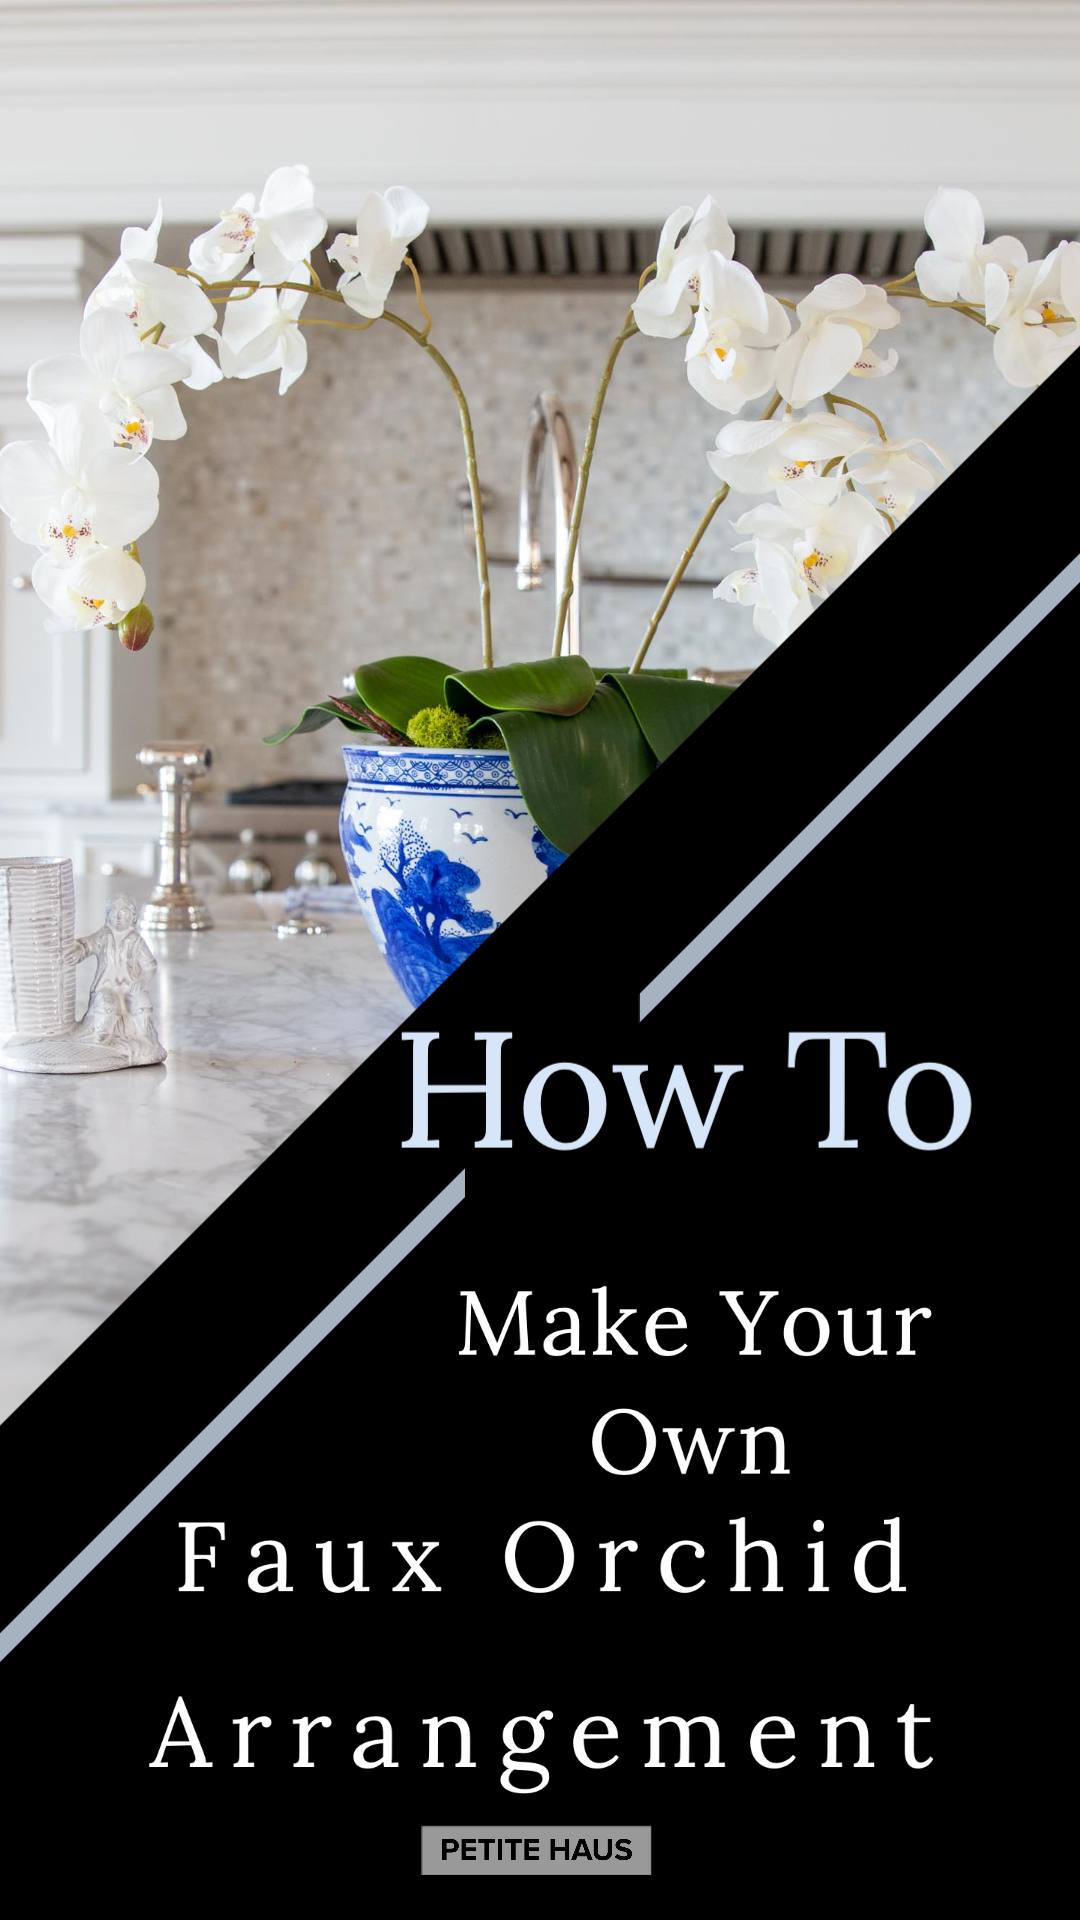 DIY tutorial to make your own faux floral orchid arrangement in blue and white chinoiserie porcelain bowl decor